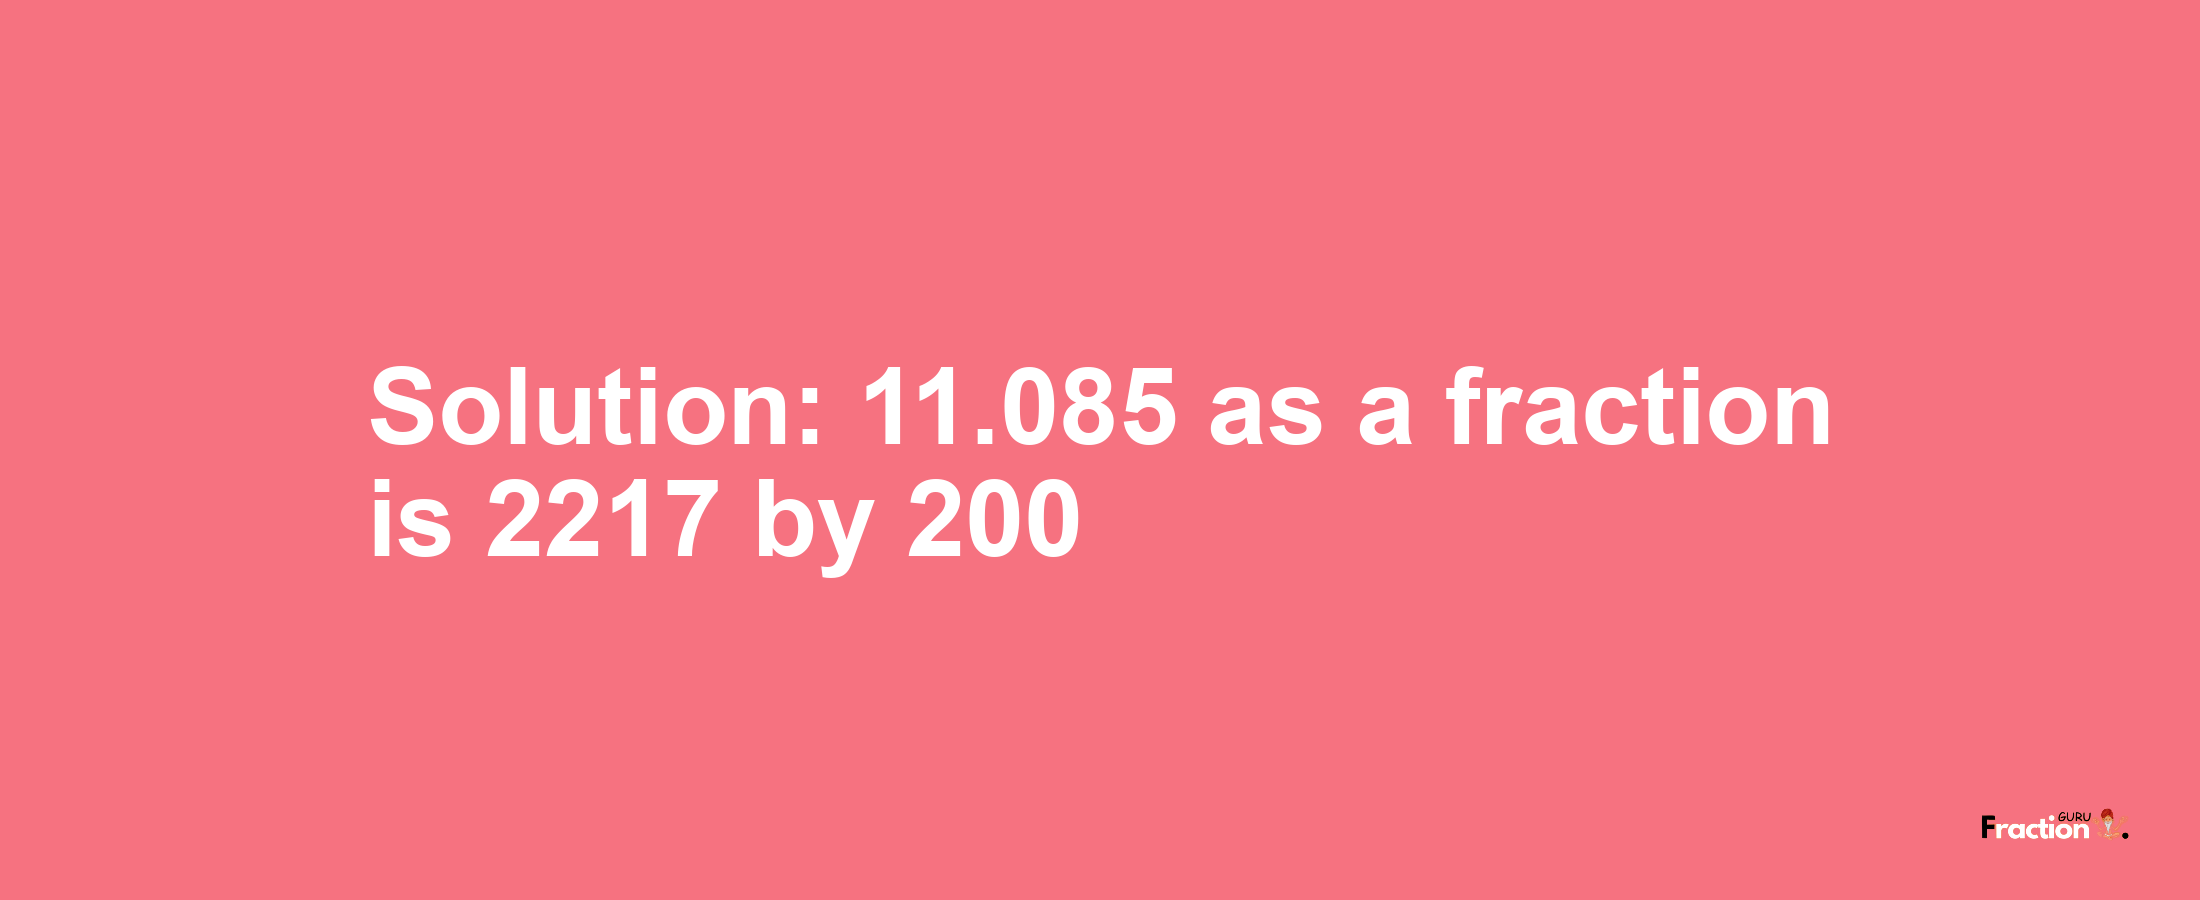 Solution:11.085 as a fraction is 2217/200